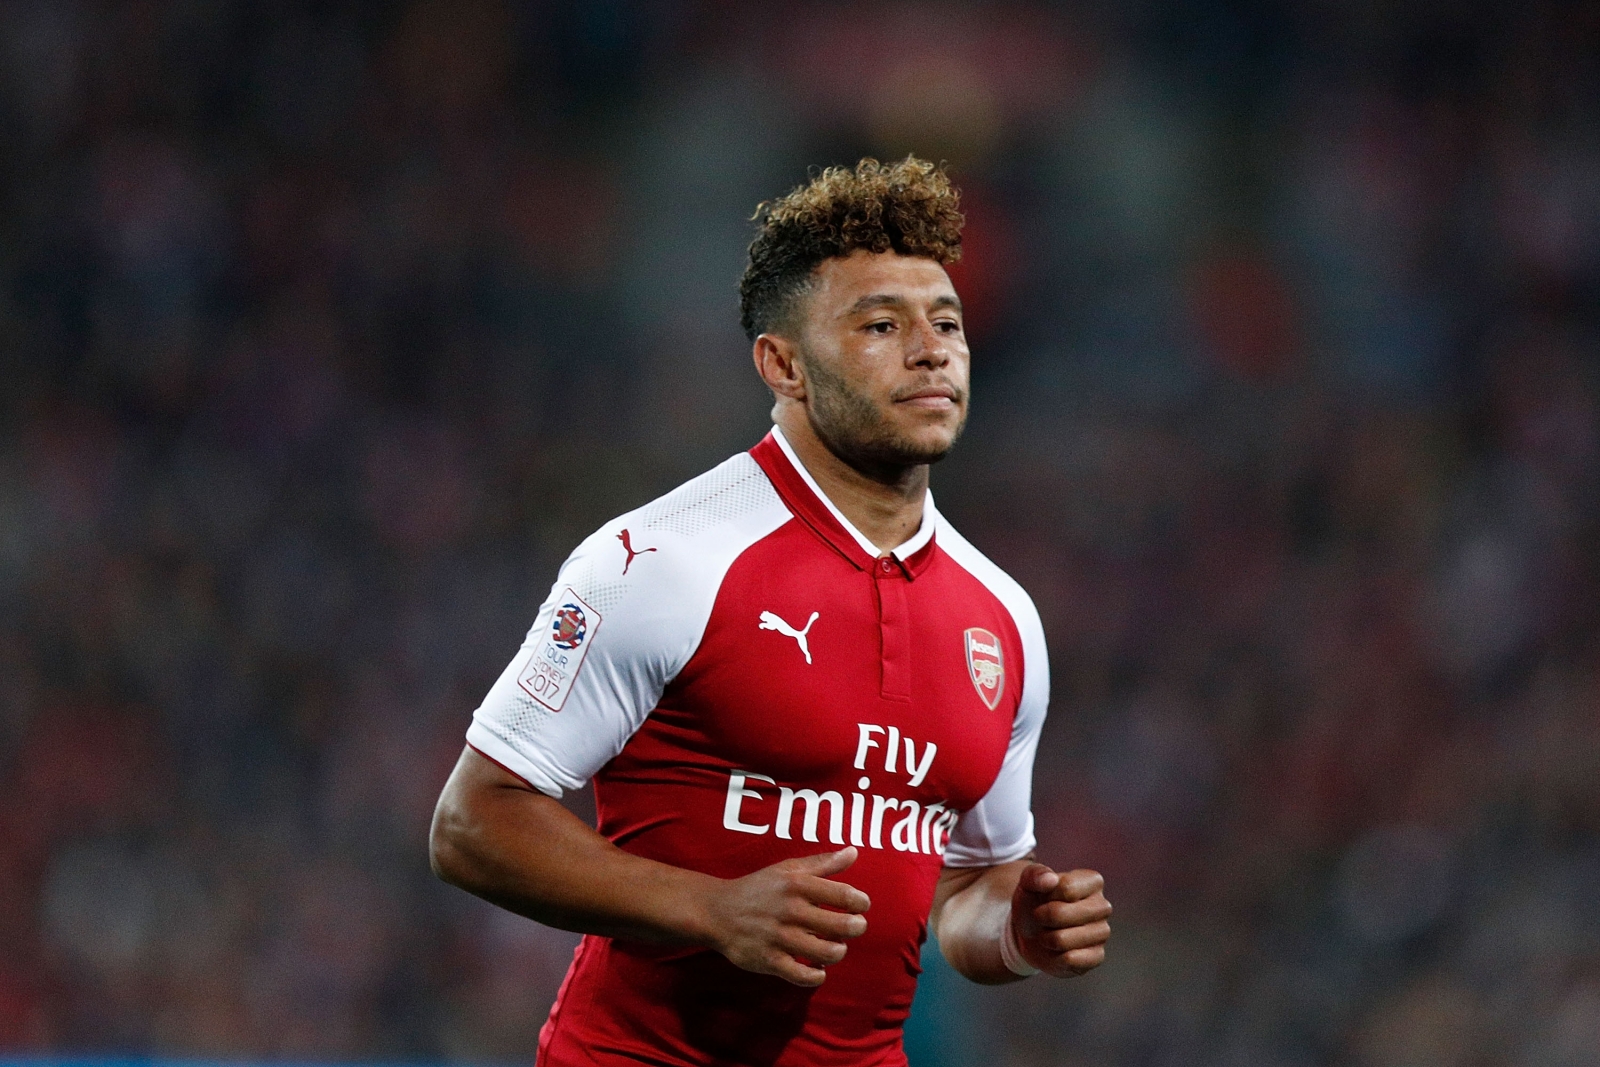 Arsene Wenger insists Alex Oxlade-Chamberlain will stay at Arsenal amid Liverpool interest